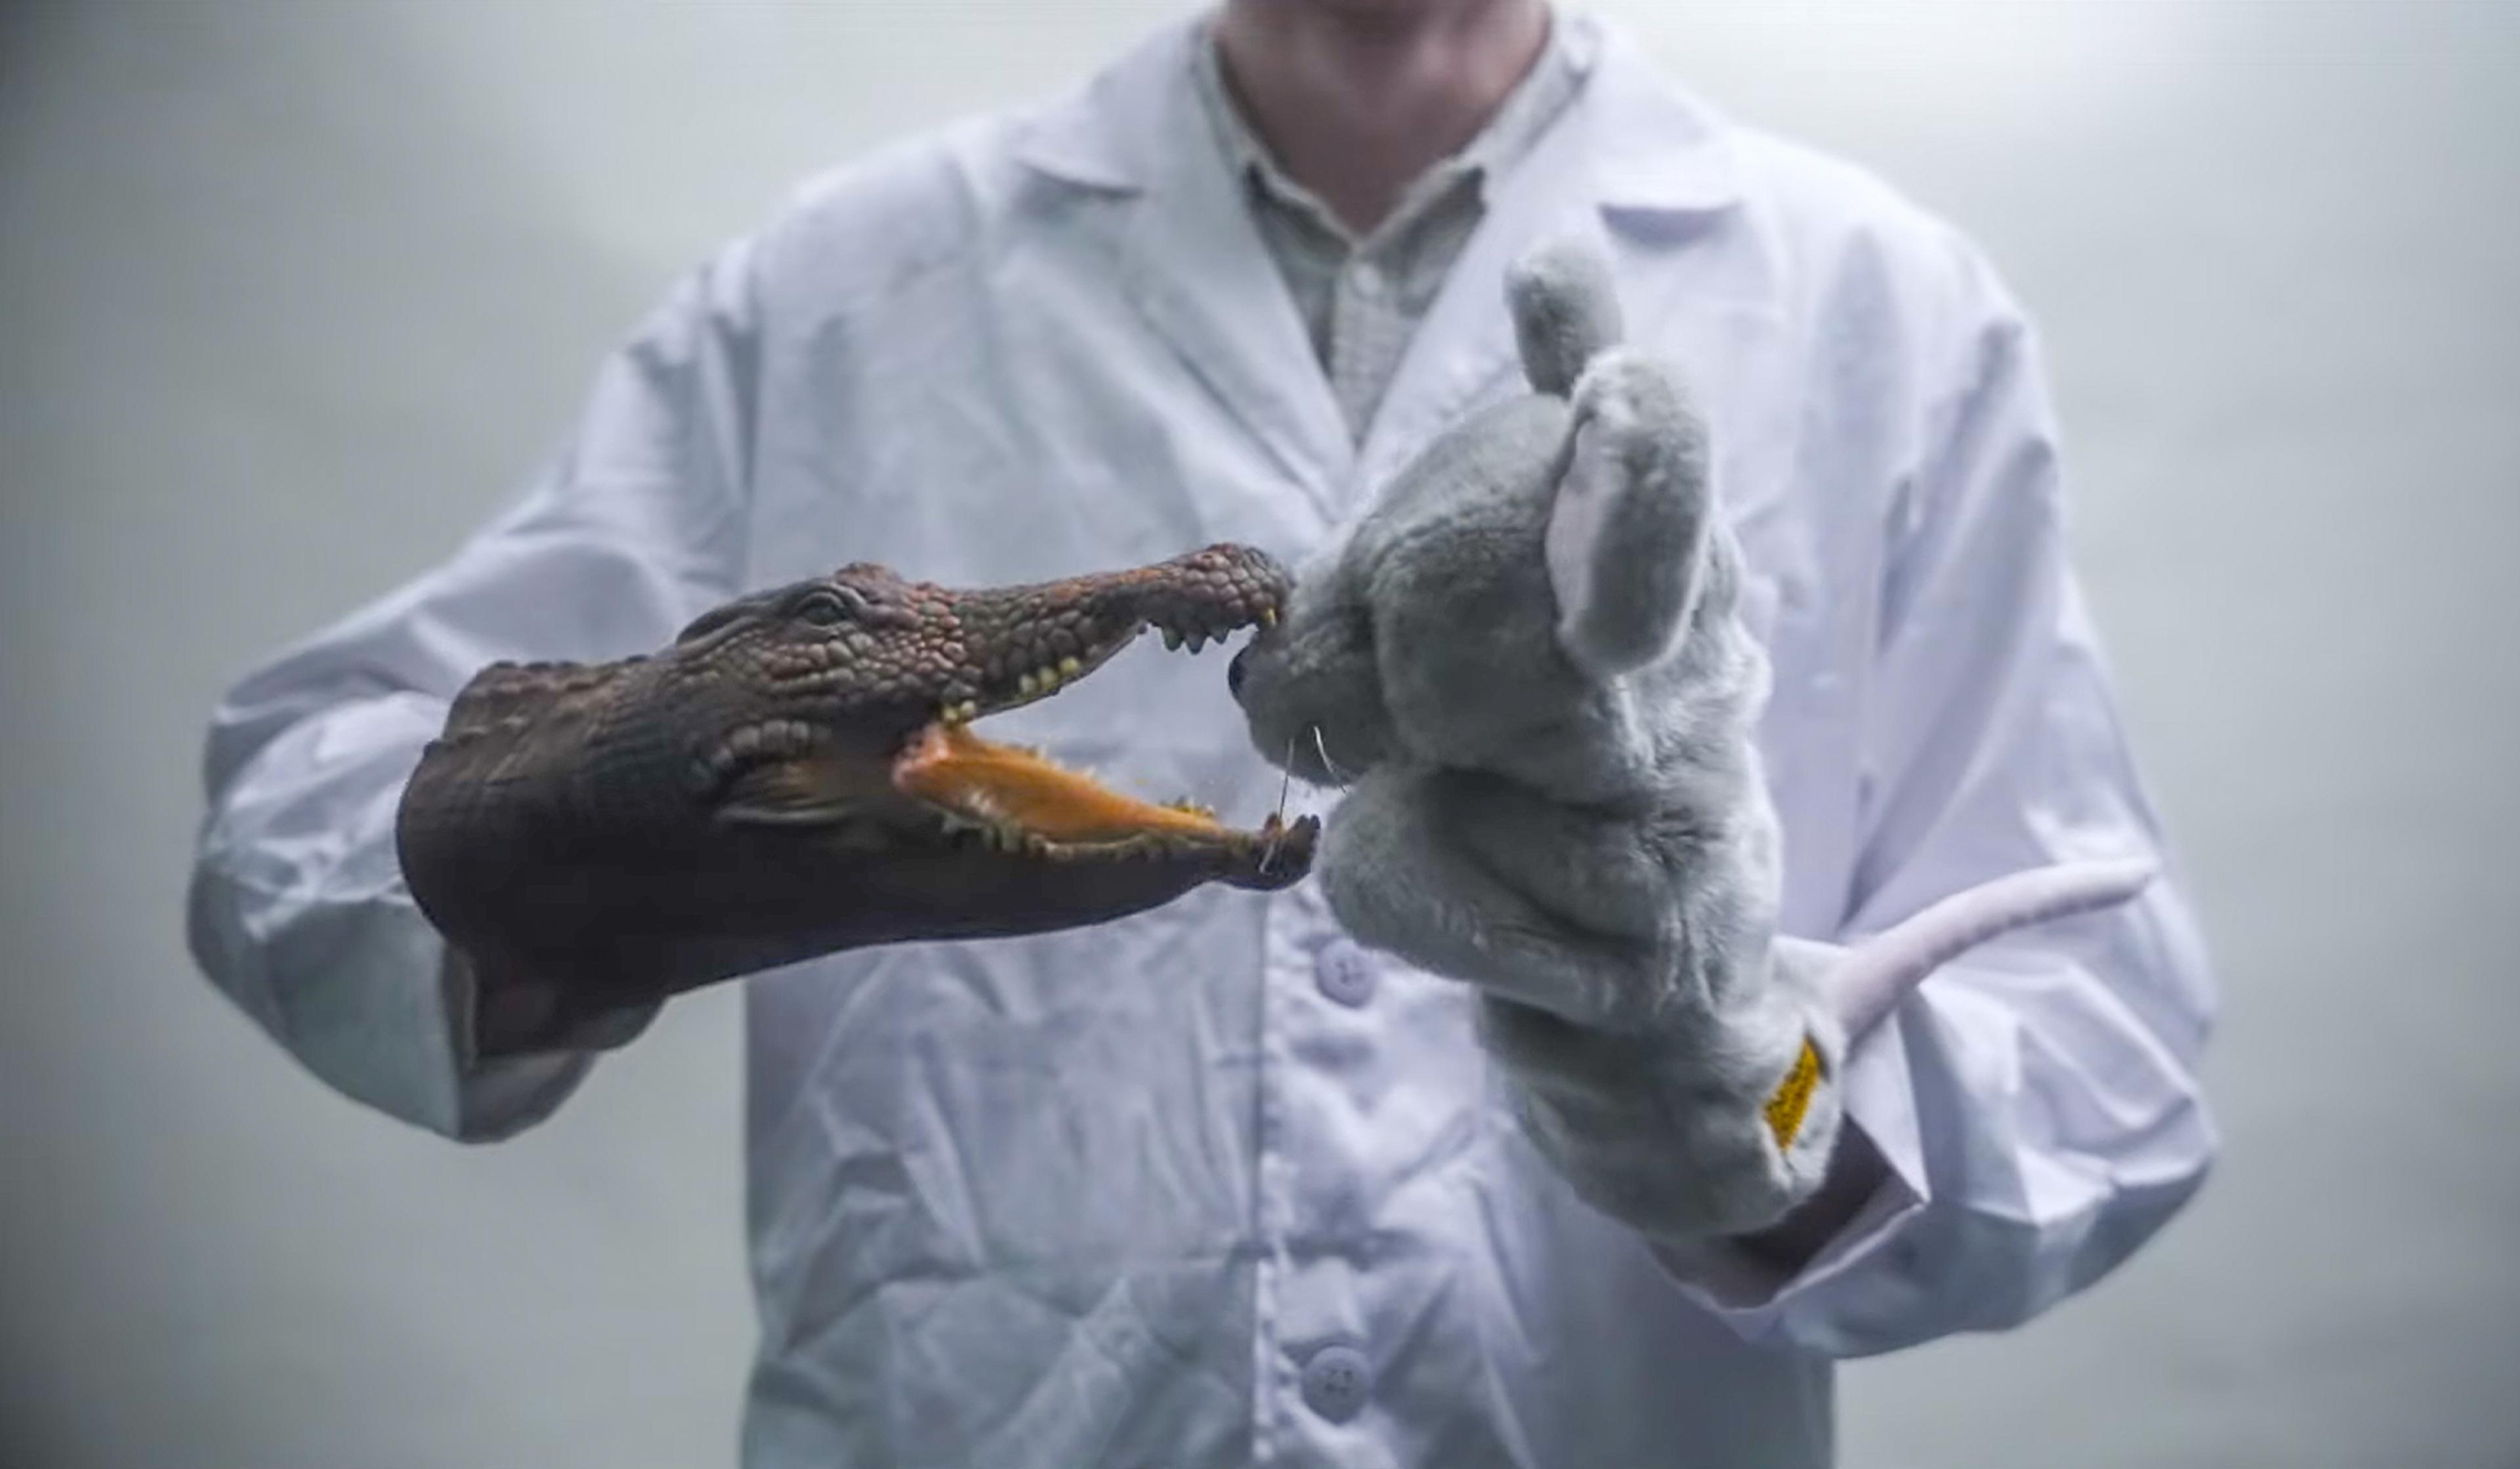 A person in a lab coat holds an alligator hand puppet and a mouse hand puppet, mimicking an interaction between them.